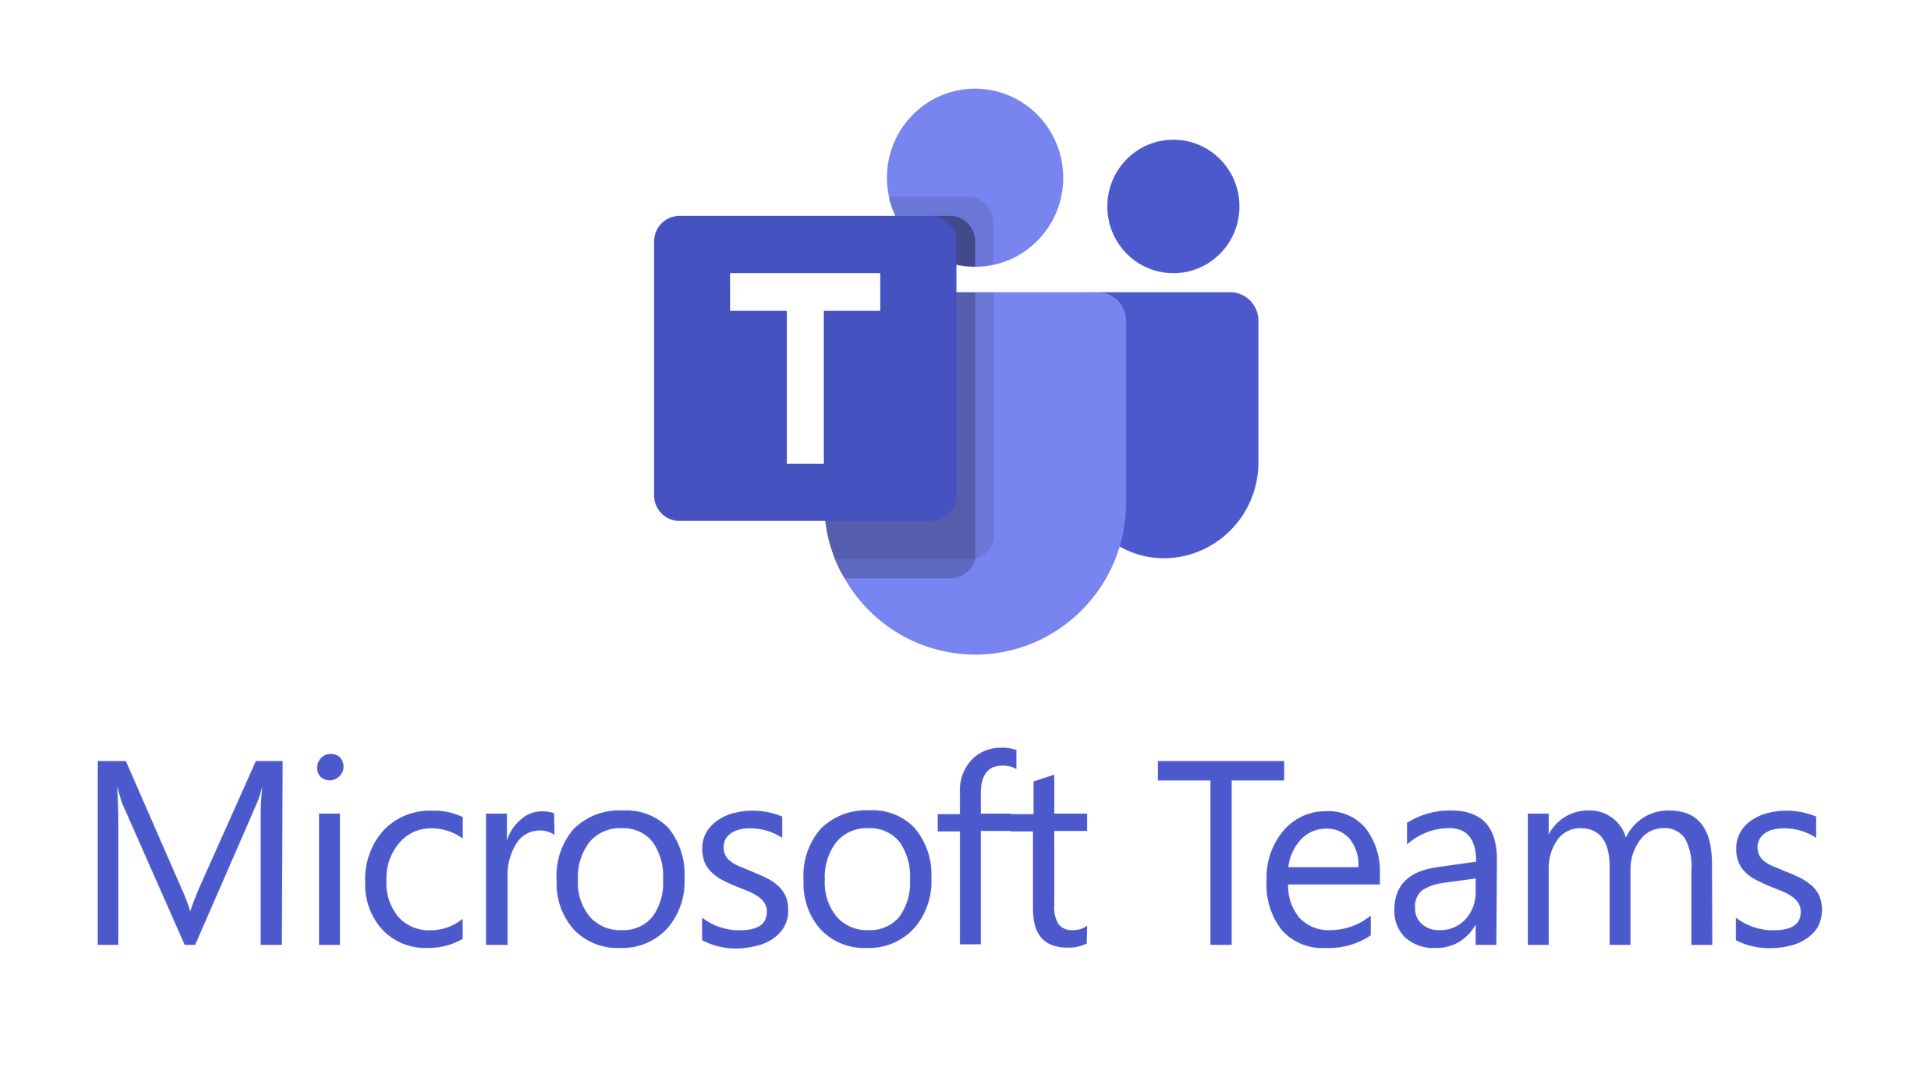 How to use Presenter modes in Microsoft Teams meetings